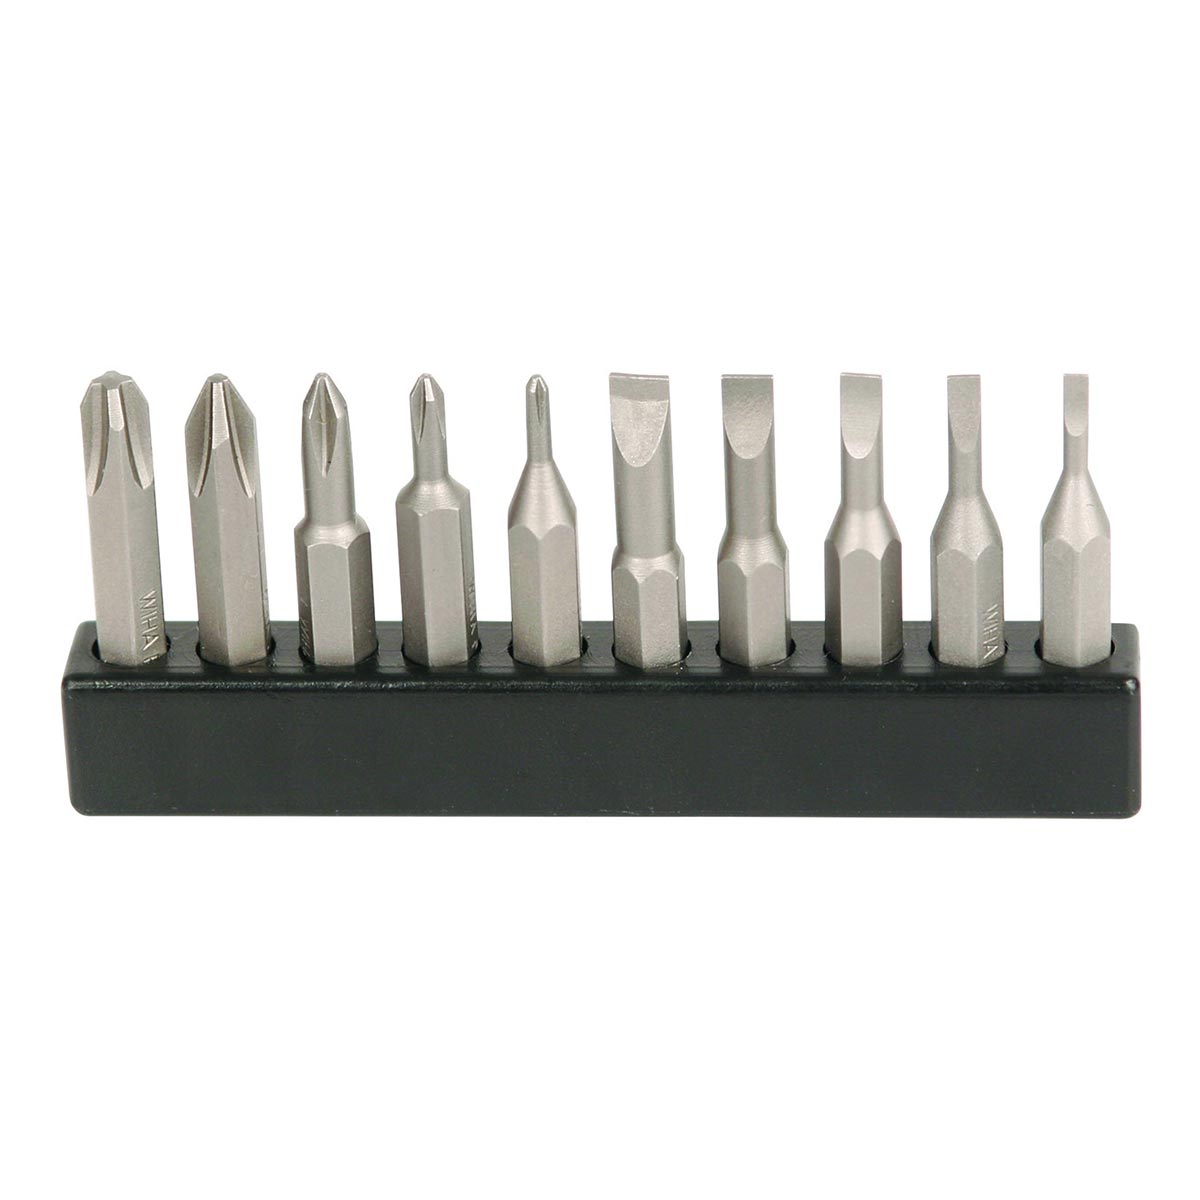 Wiha 75987 MicroBit Slotted and Phillips – 10 Piece Set